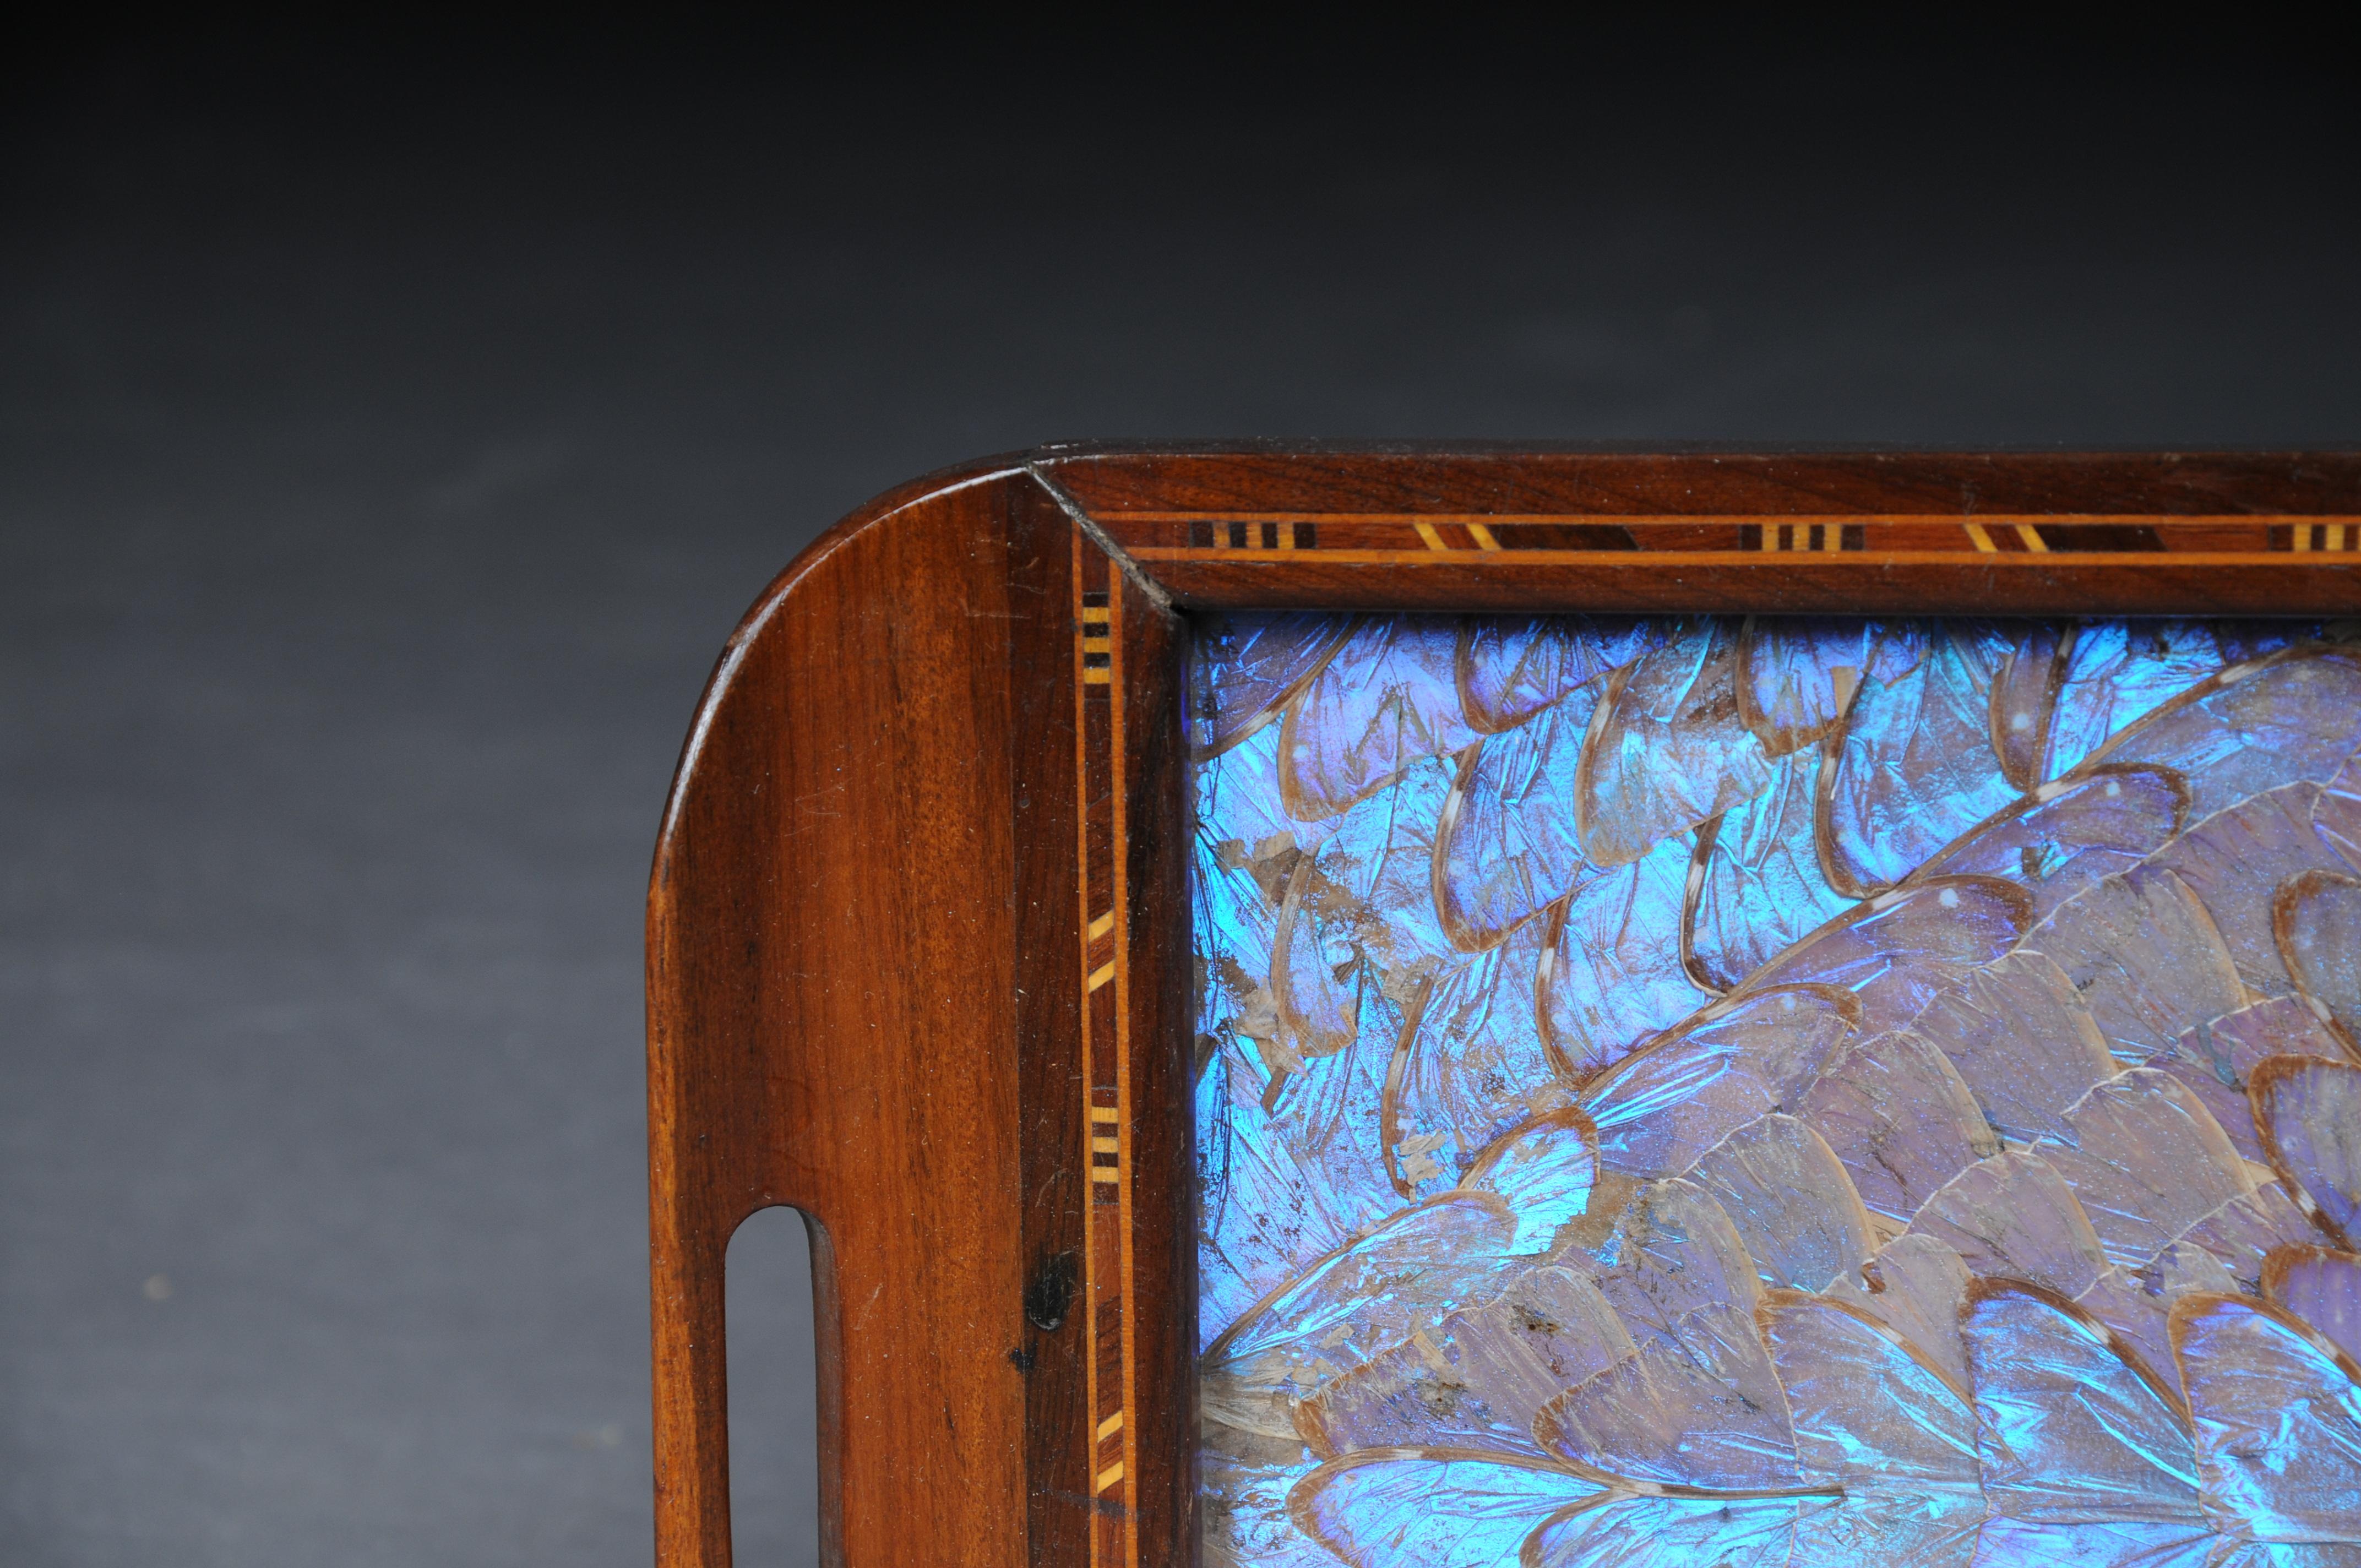 Curious antique tray real butterfly wings


Solid wood frame with marquetry inlays. In the middle a shimmering violet pattern made of real butterfly wings. Extremely unusual and curious. The tray has a wall bracket at the back which can be hung